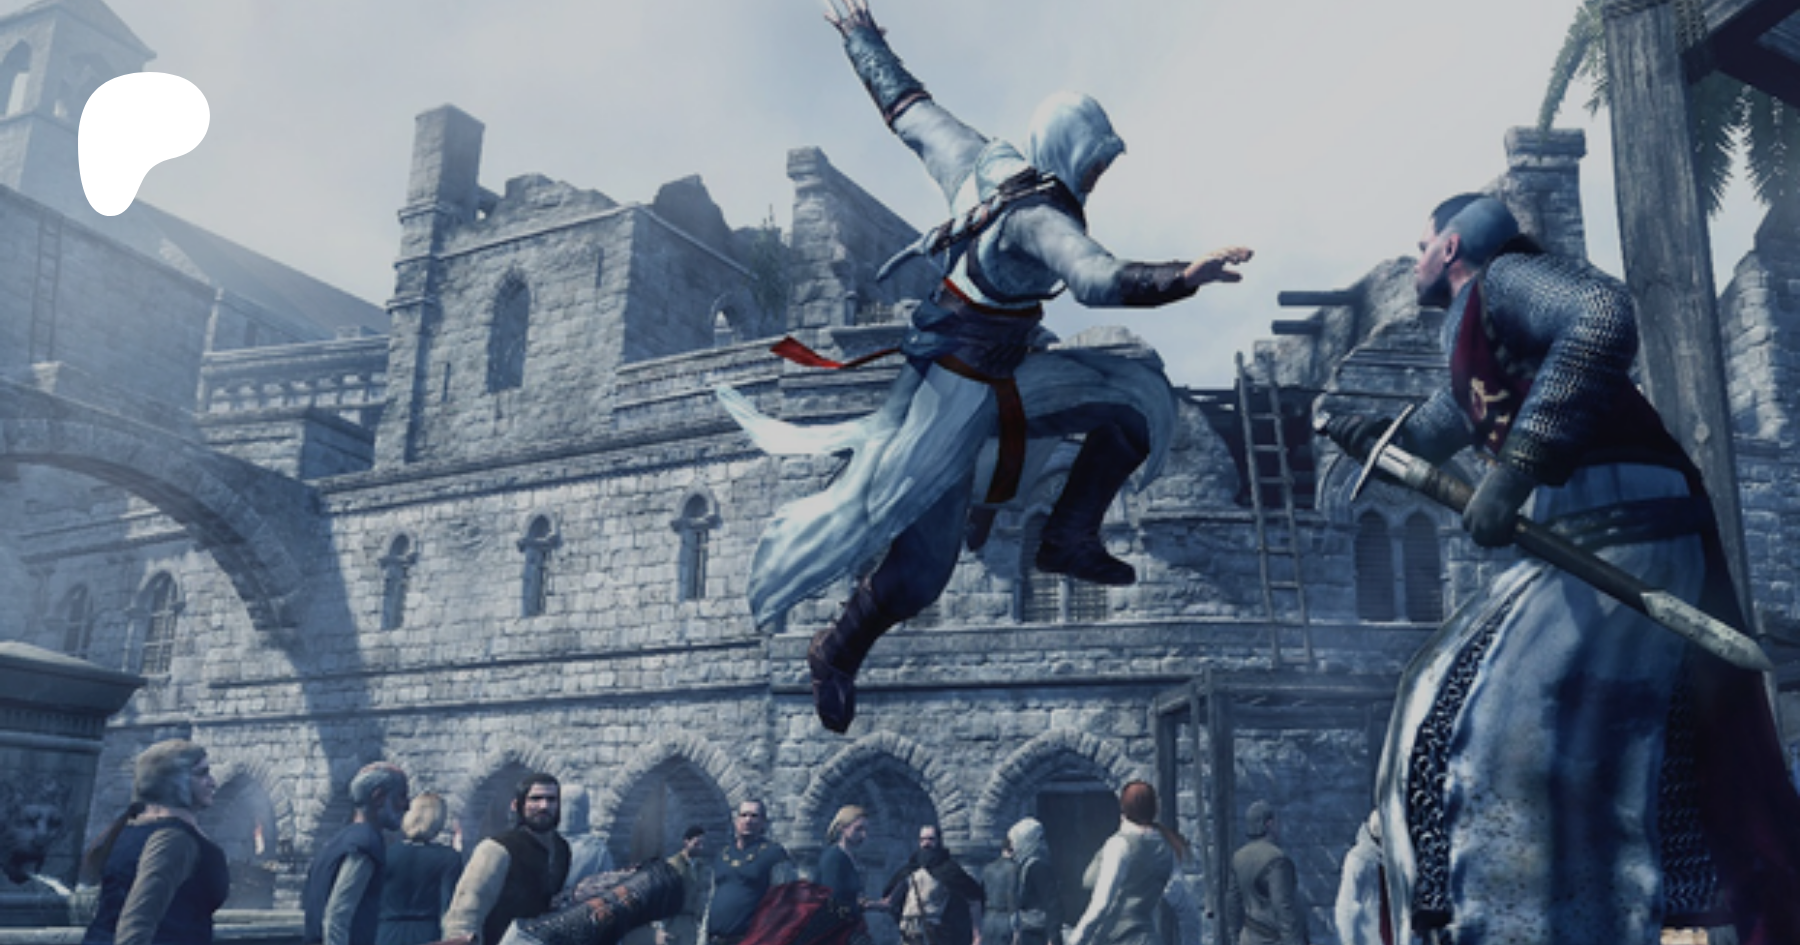 Assassin's Creed III's Connor: How Ubisoft Avoided Stereotypes and Made a  Real Character